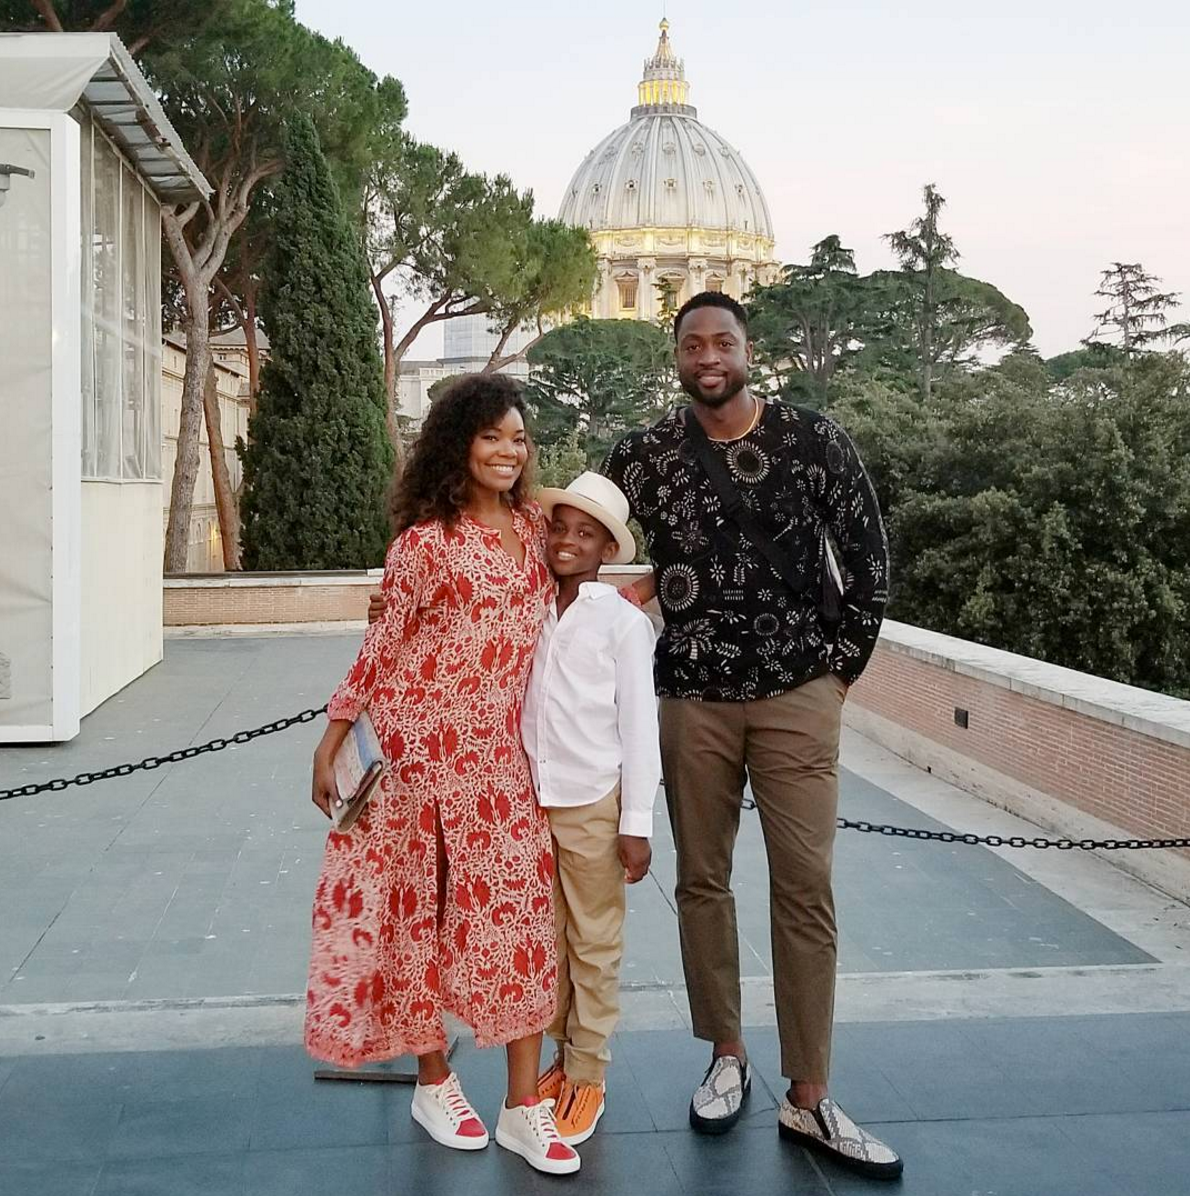 Gabrielle Union And Dwyane Wade's Italian Family Vacation Photos Will Give You Major FOMO
